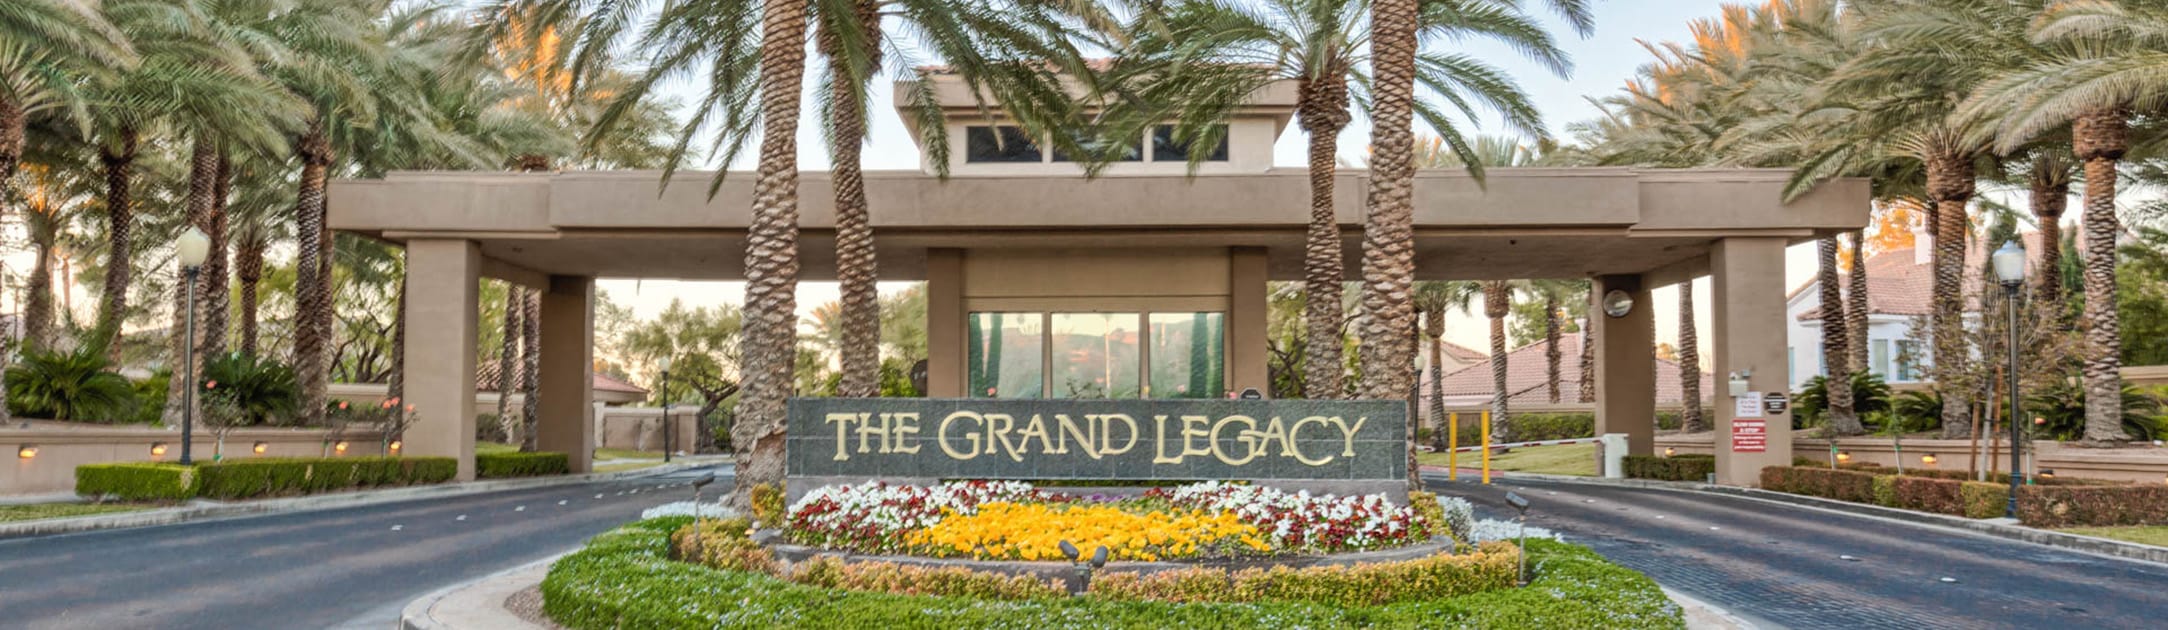 Brick stand with sign that says The Grand Legacy, flowers, bushes, palm trees and gate entrance building behind.